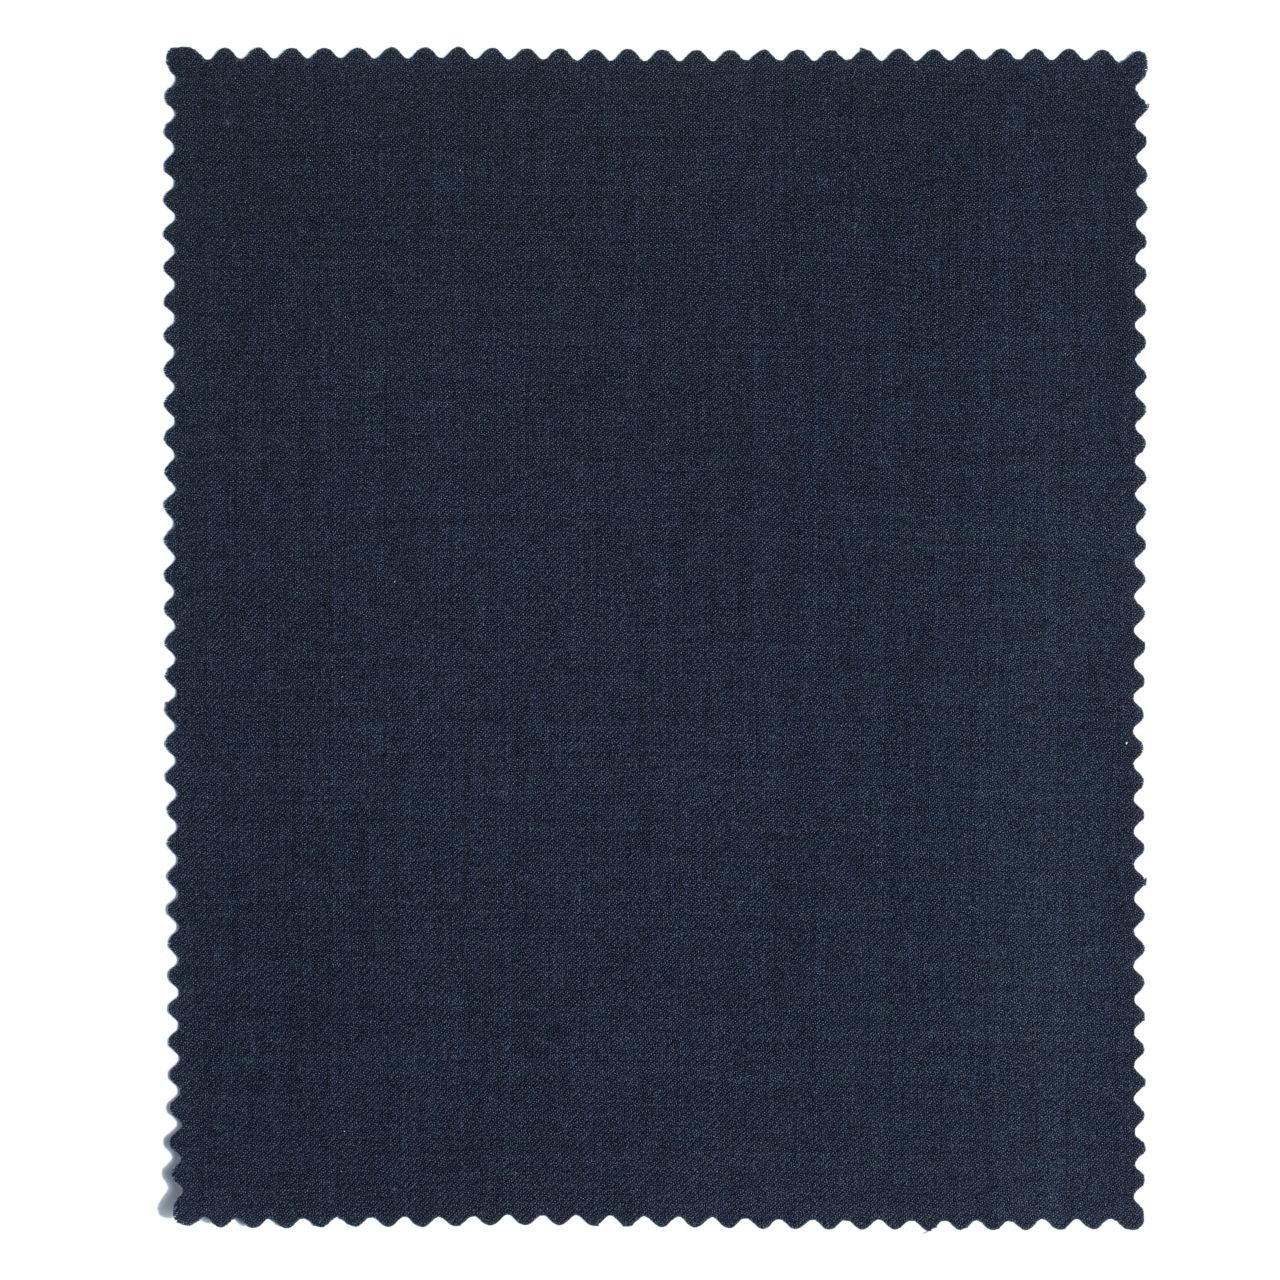 Super 120s Luxury Wool Serge Comfort-EZE Trouser in Navy Mix (Flat Front Models) by Ballin